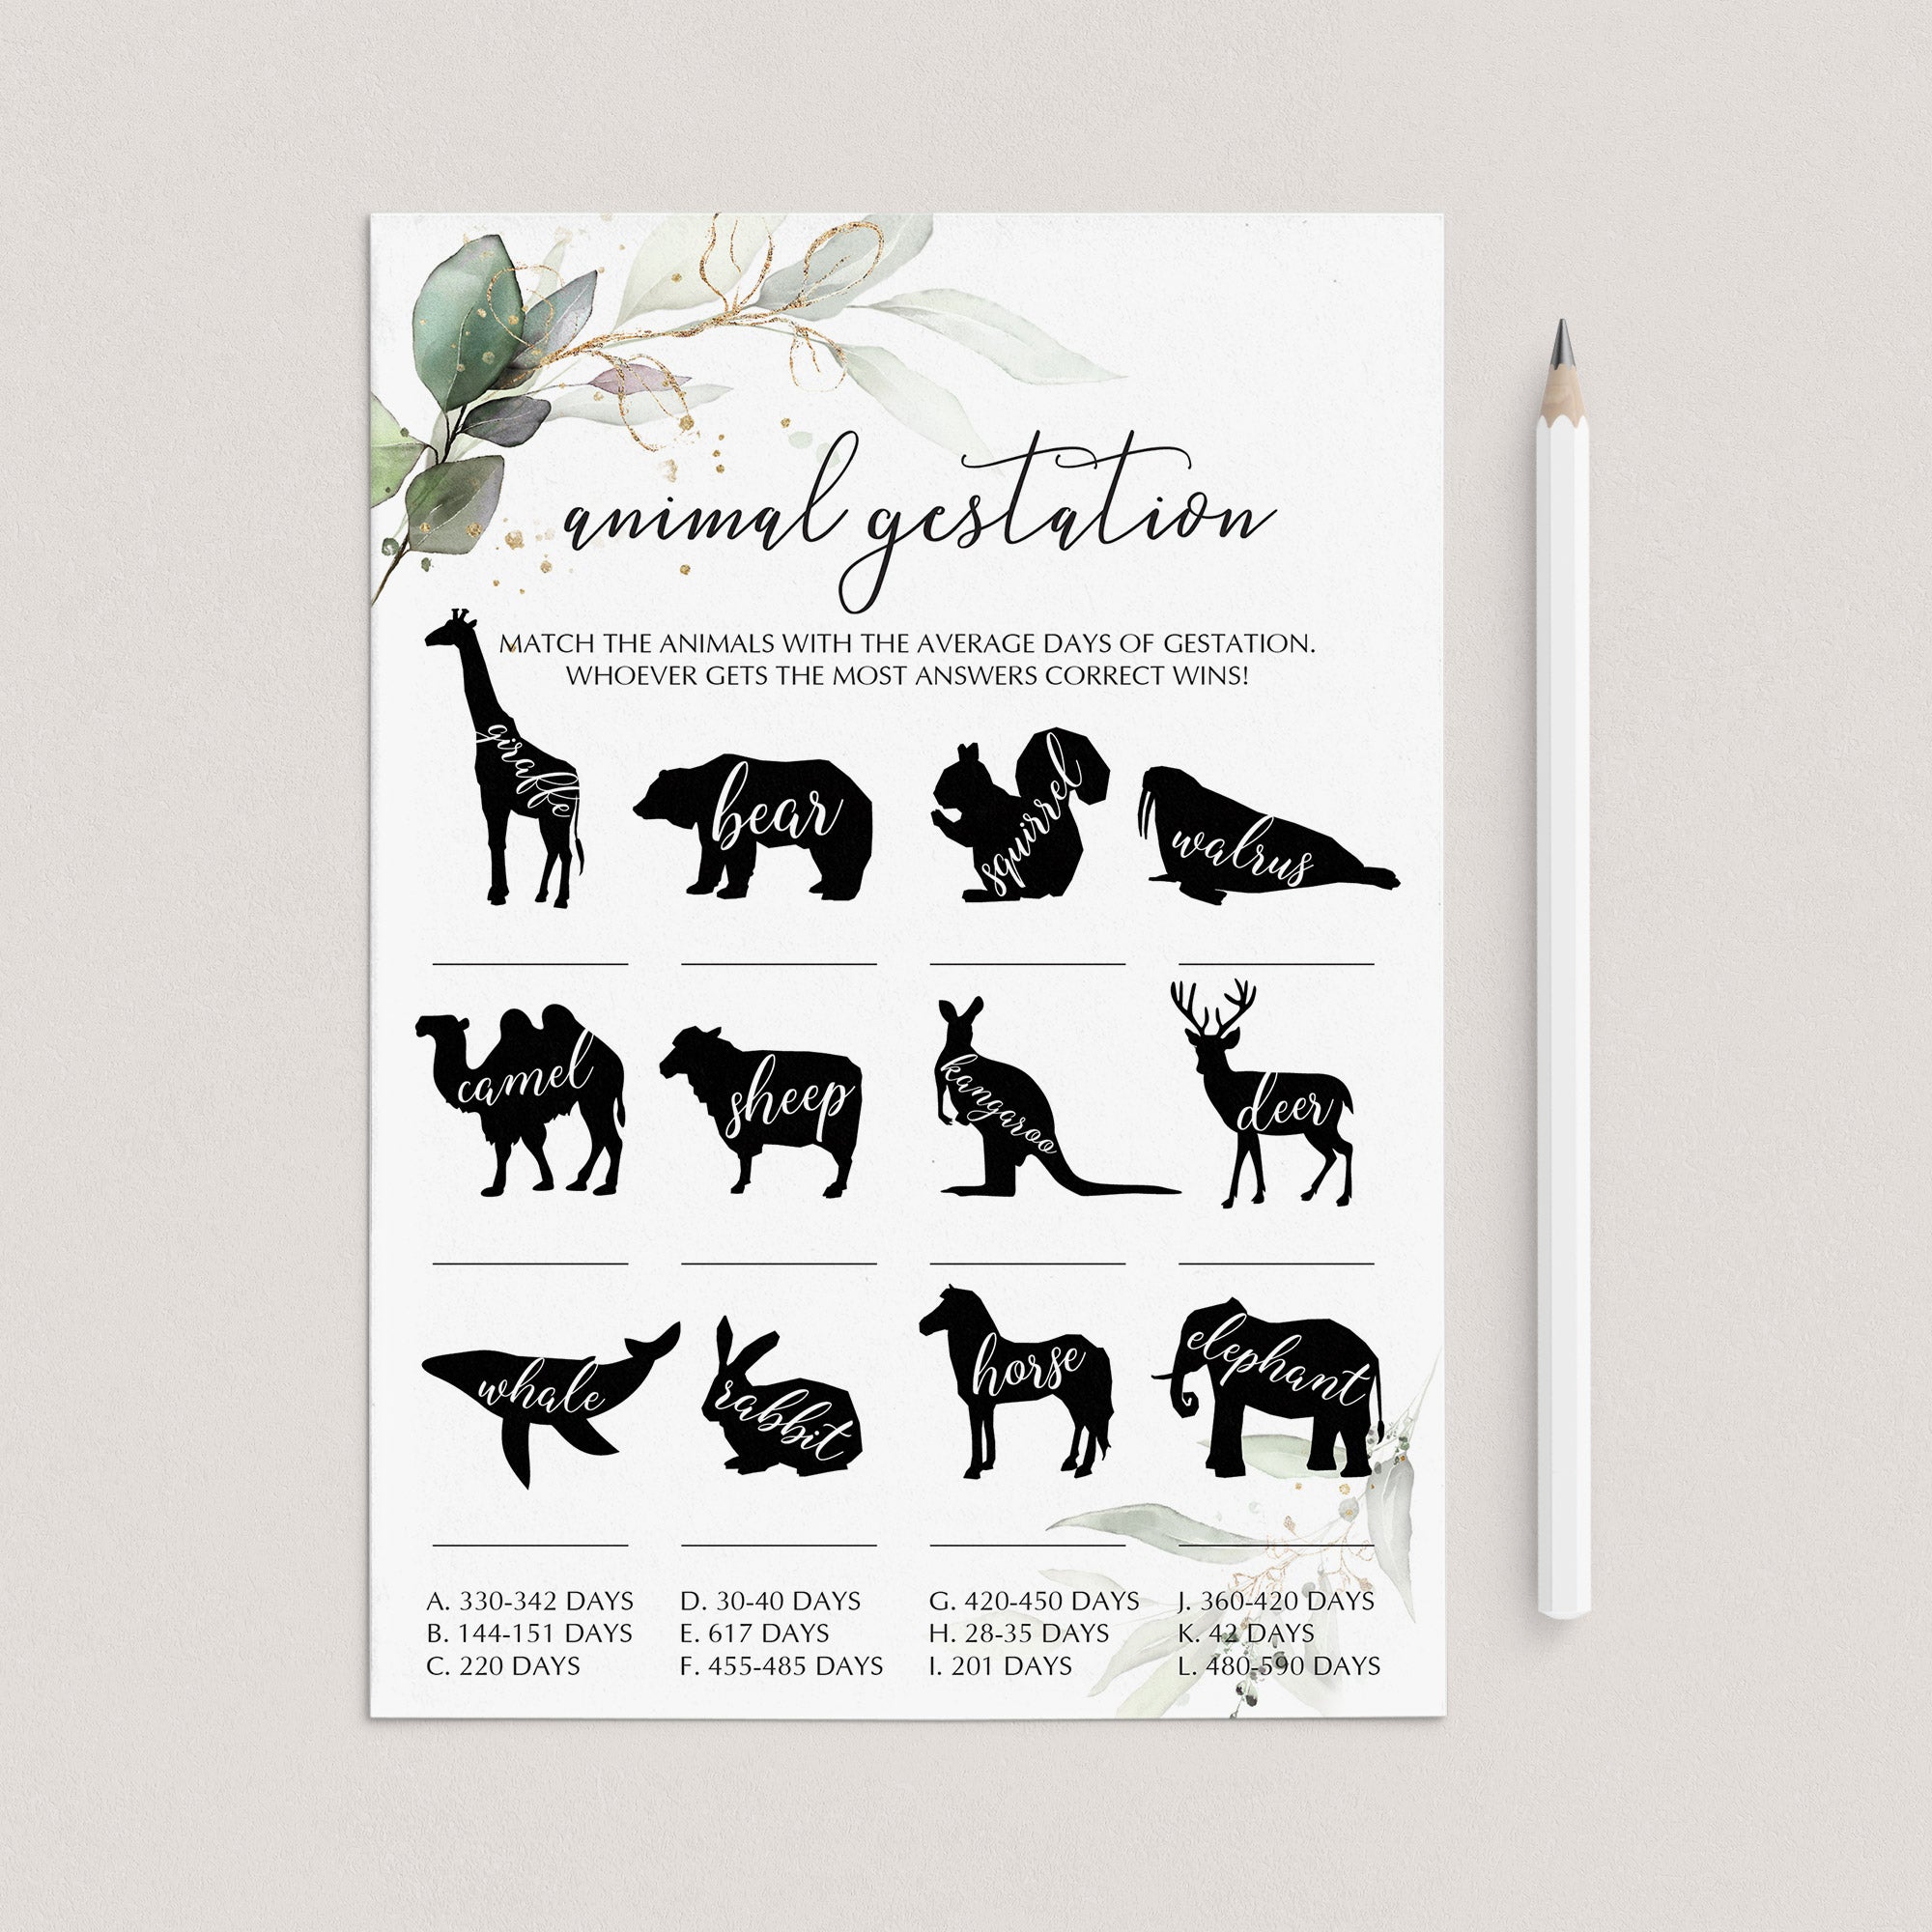 Greenery and Gold Baby Shower Game Animal Gestation Match by LittleSizzle